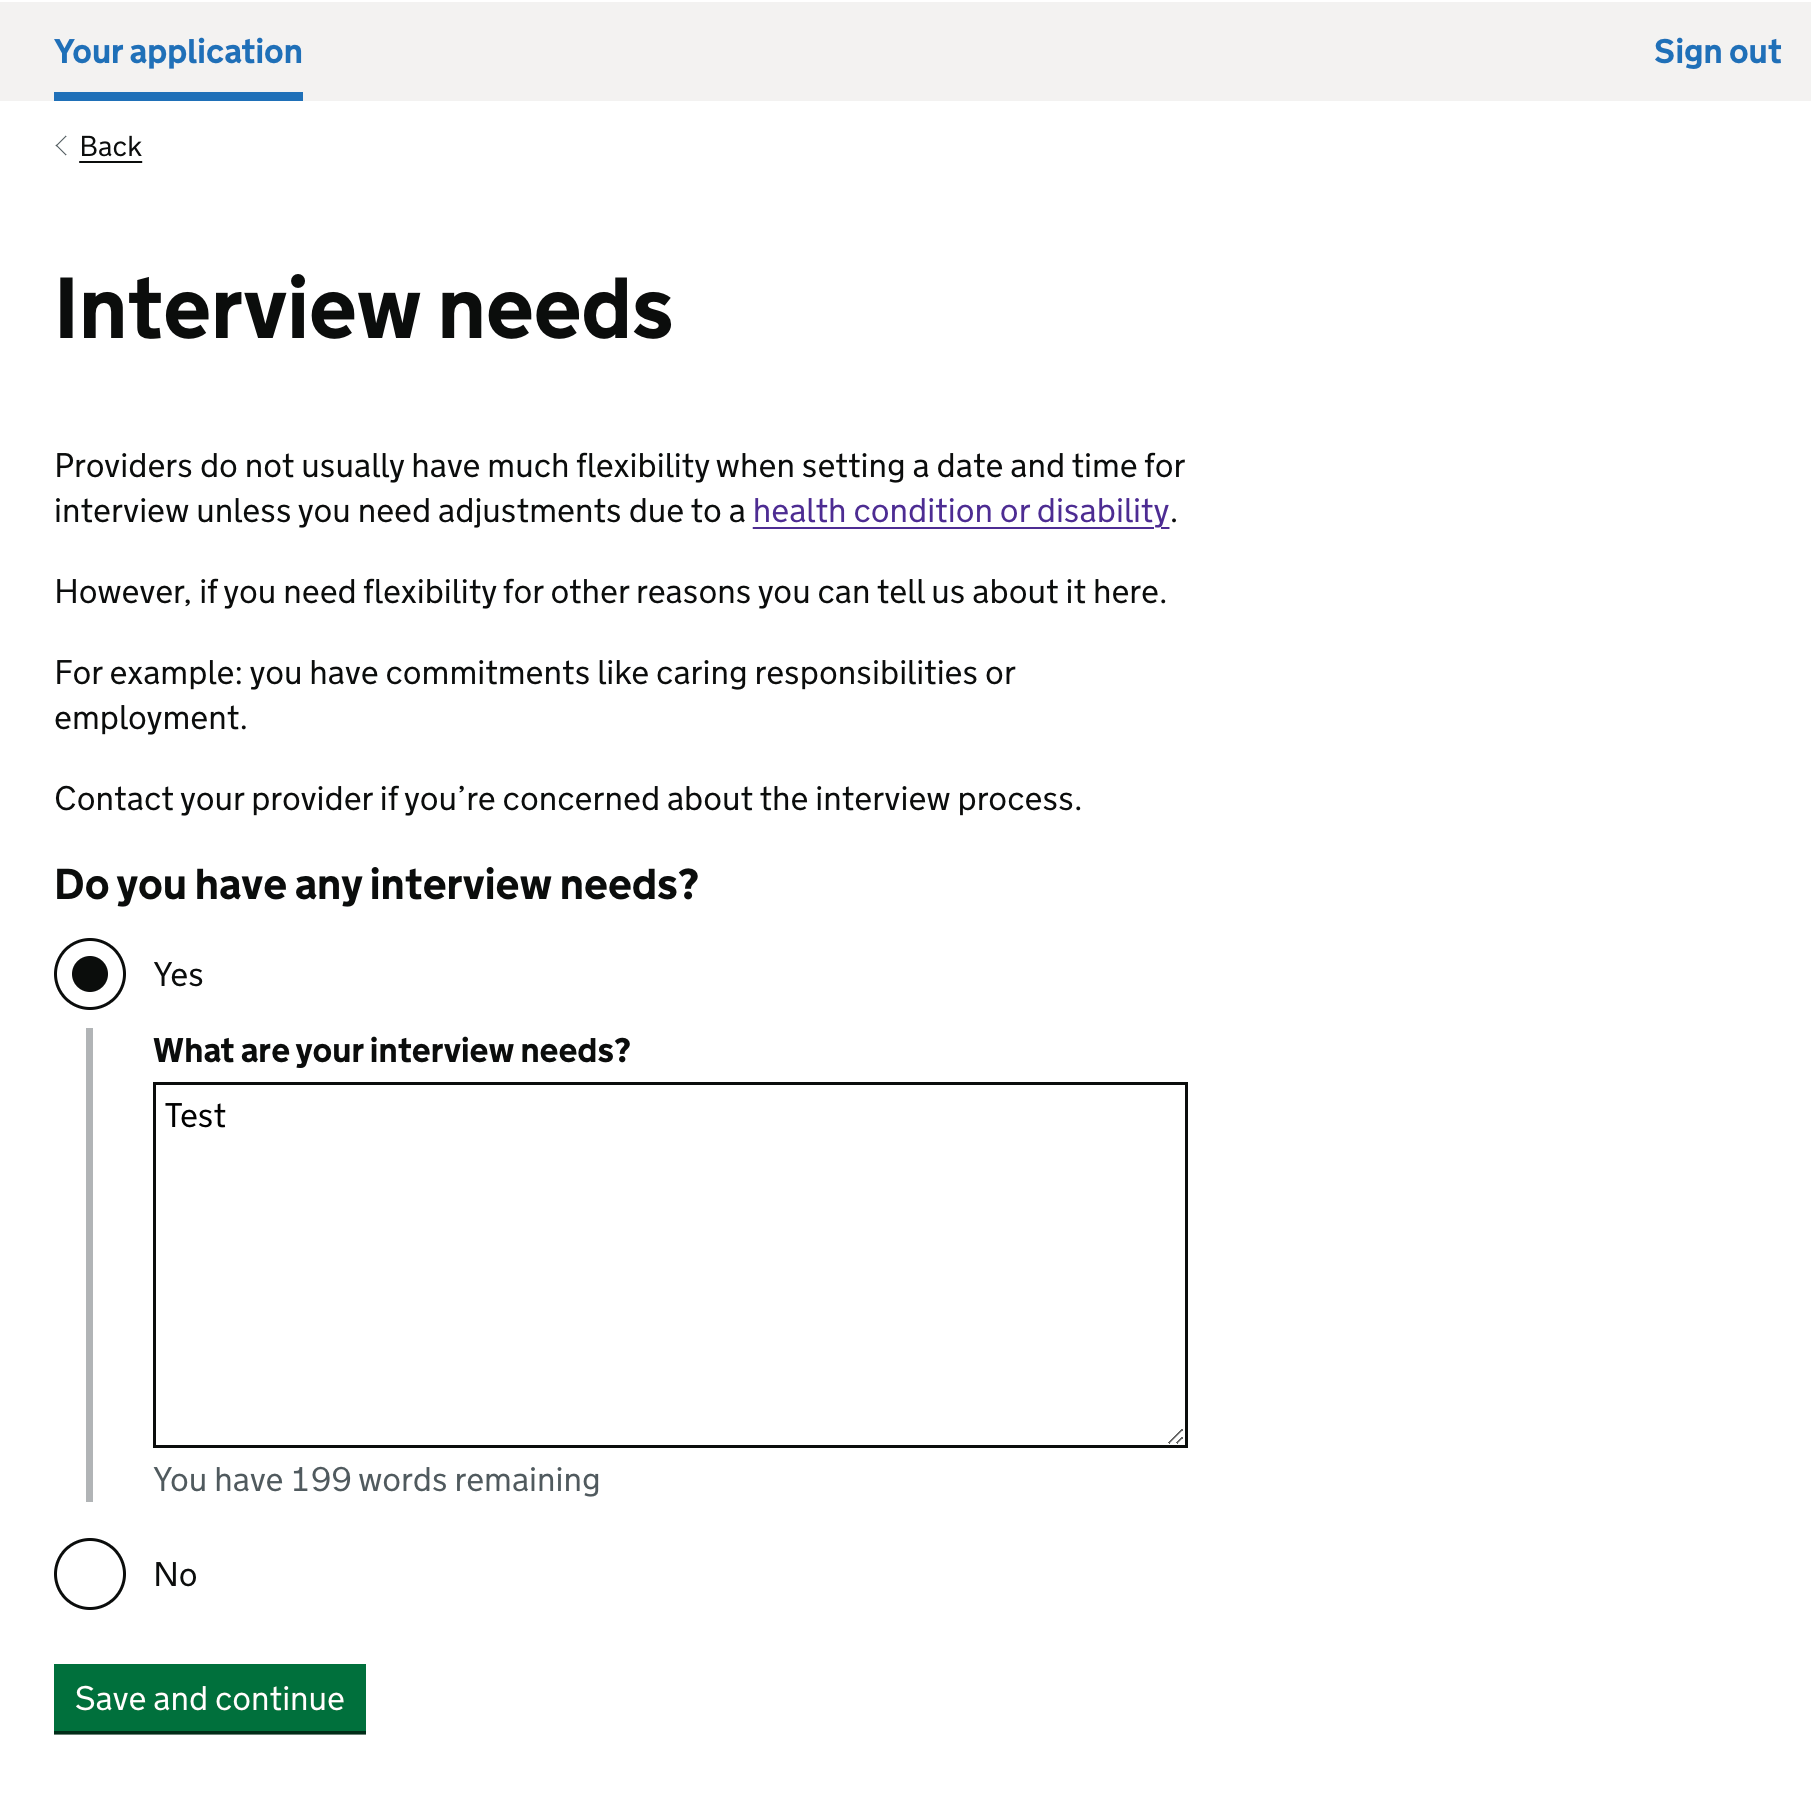 Screenshot of a page called 'Interview needs' where a user can tell training providers about anything they might need for an interview.